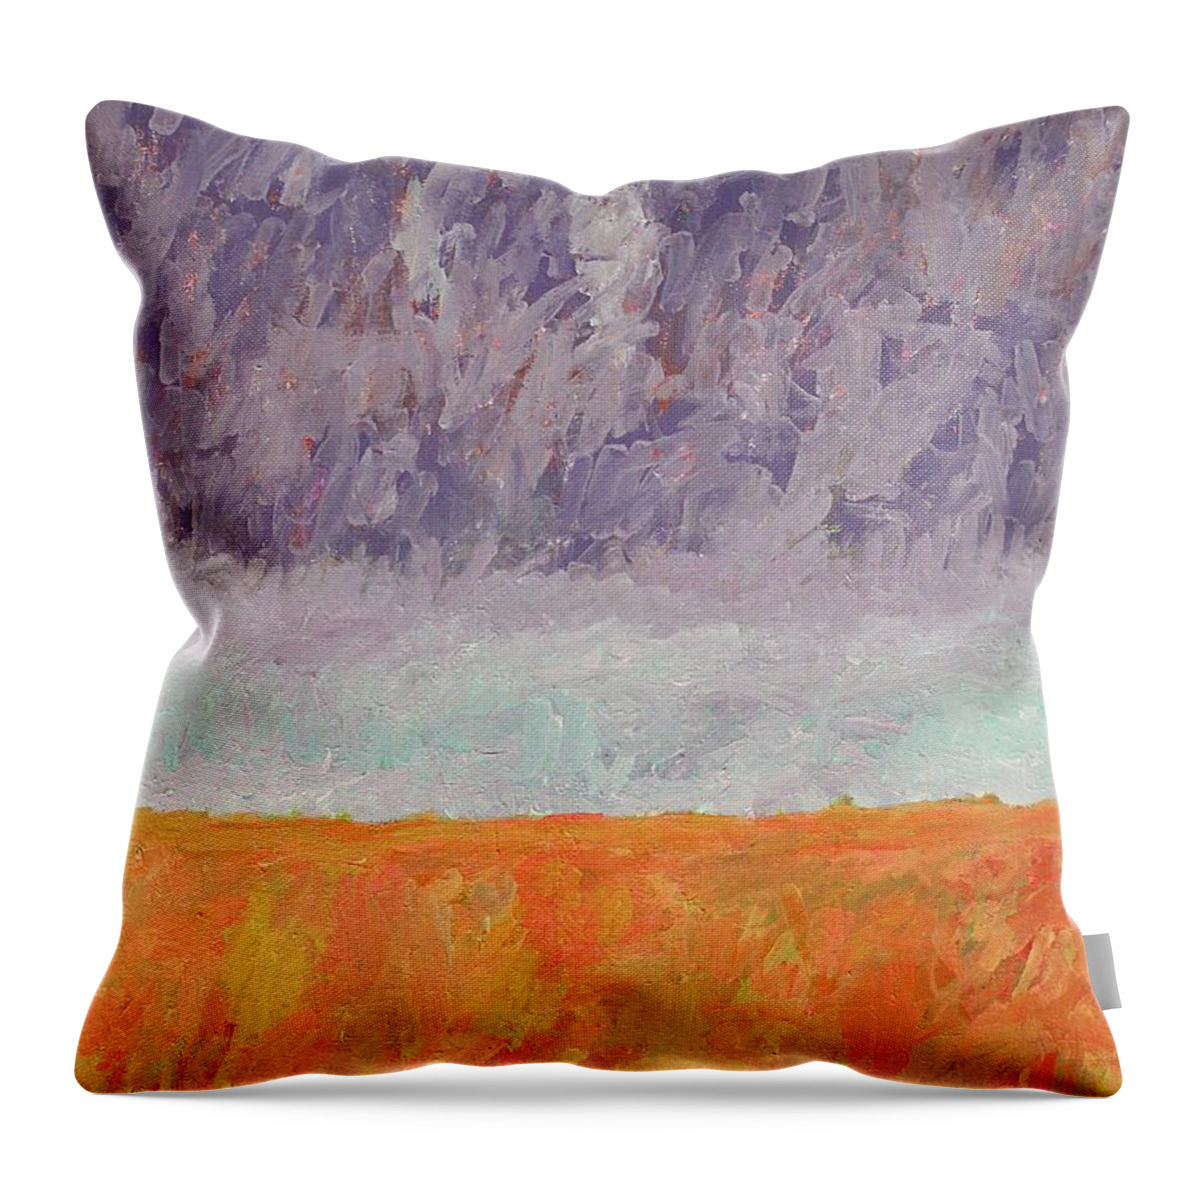 Marsh Throw Pillow featuring the painting Autumn Marsh original painting by Sol Luckman